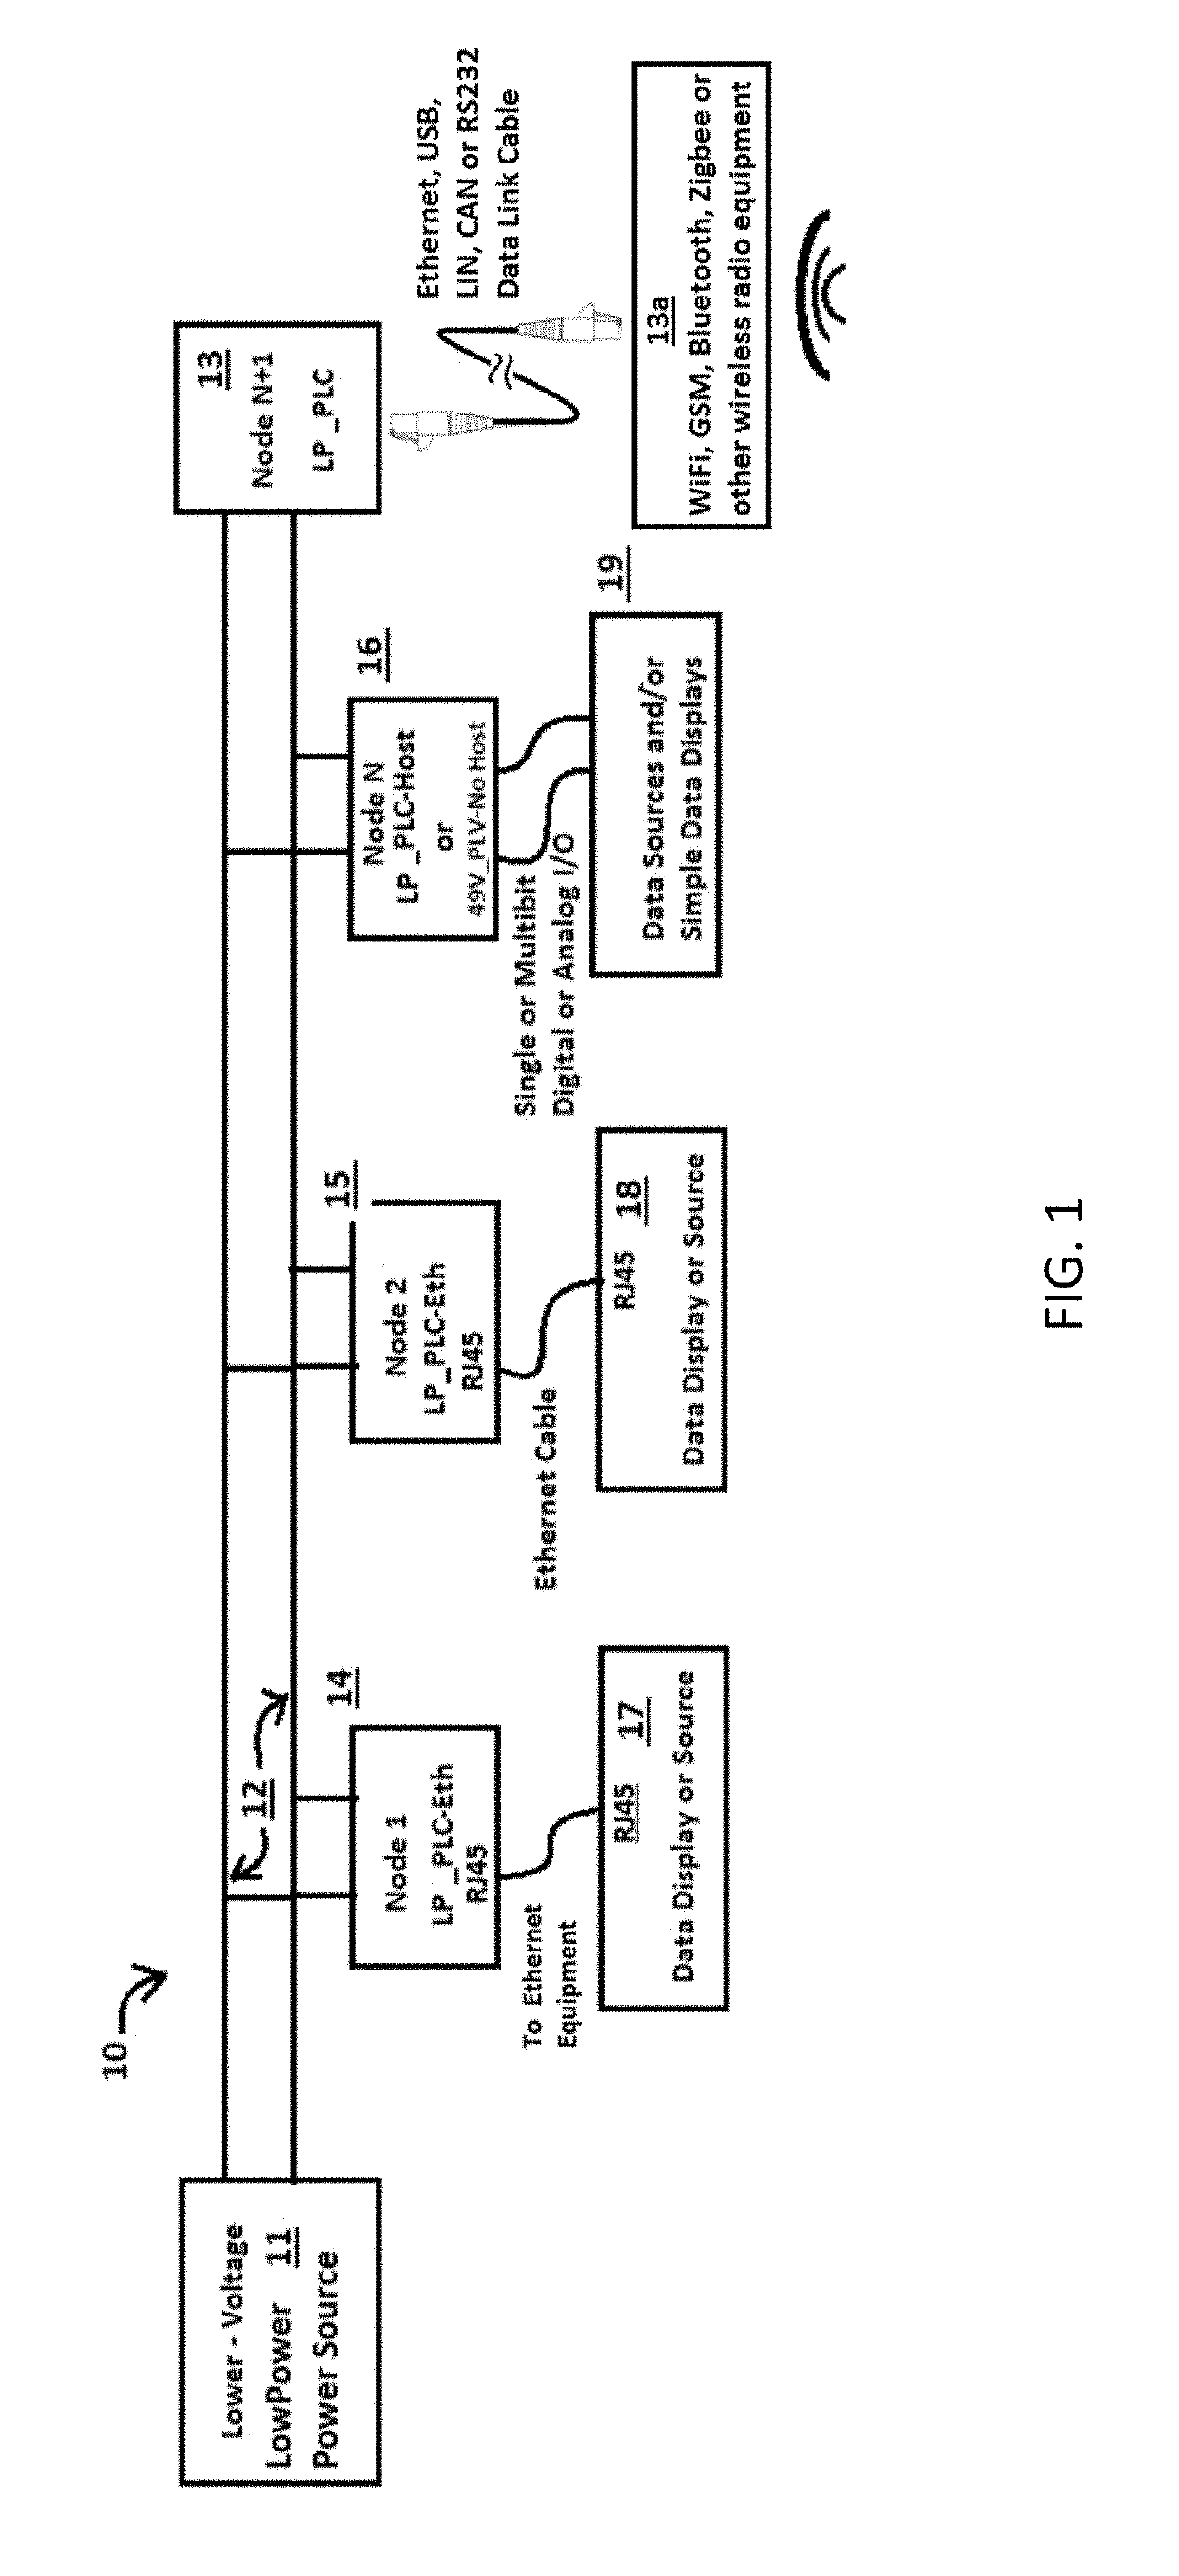 Impedance isolated power and wired data communication network